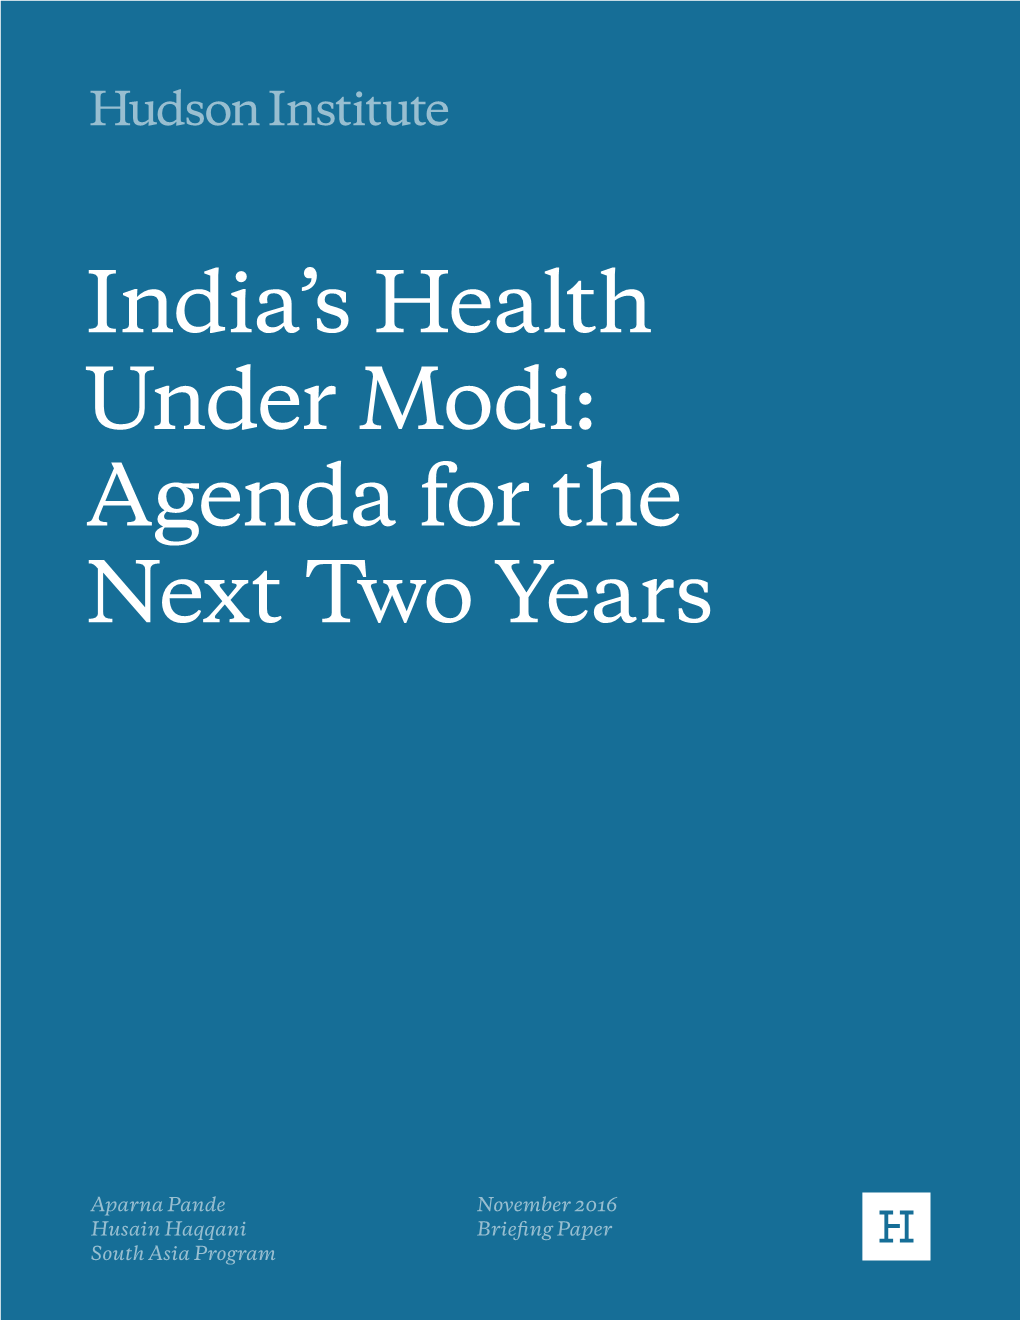 India's Health Under Modi: Agenda for the Next Two Years